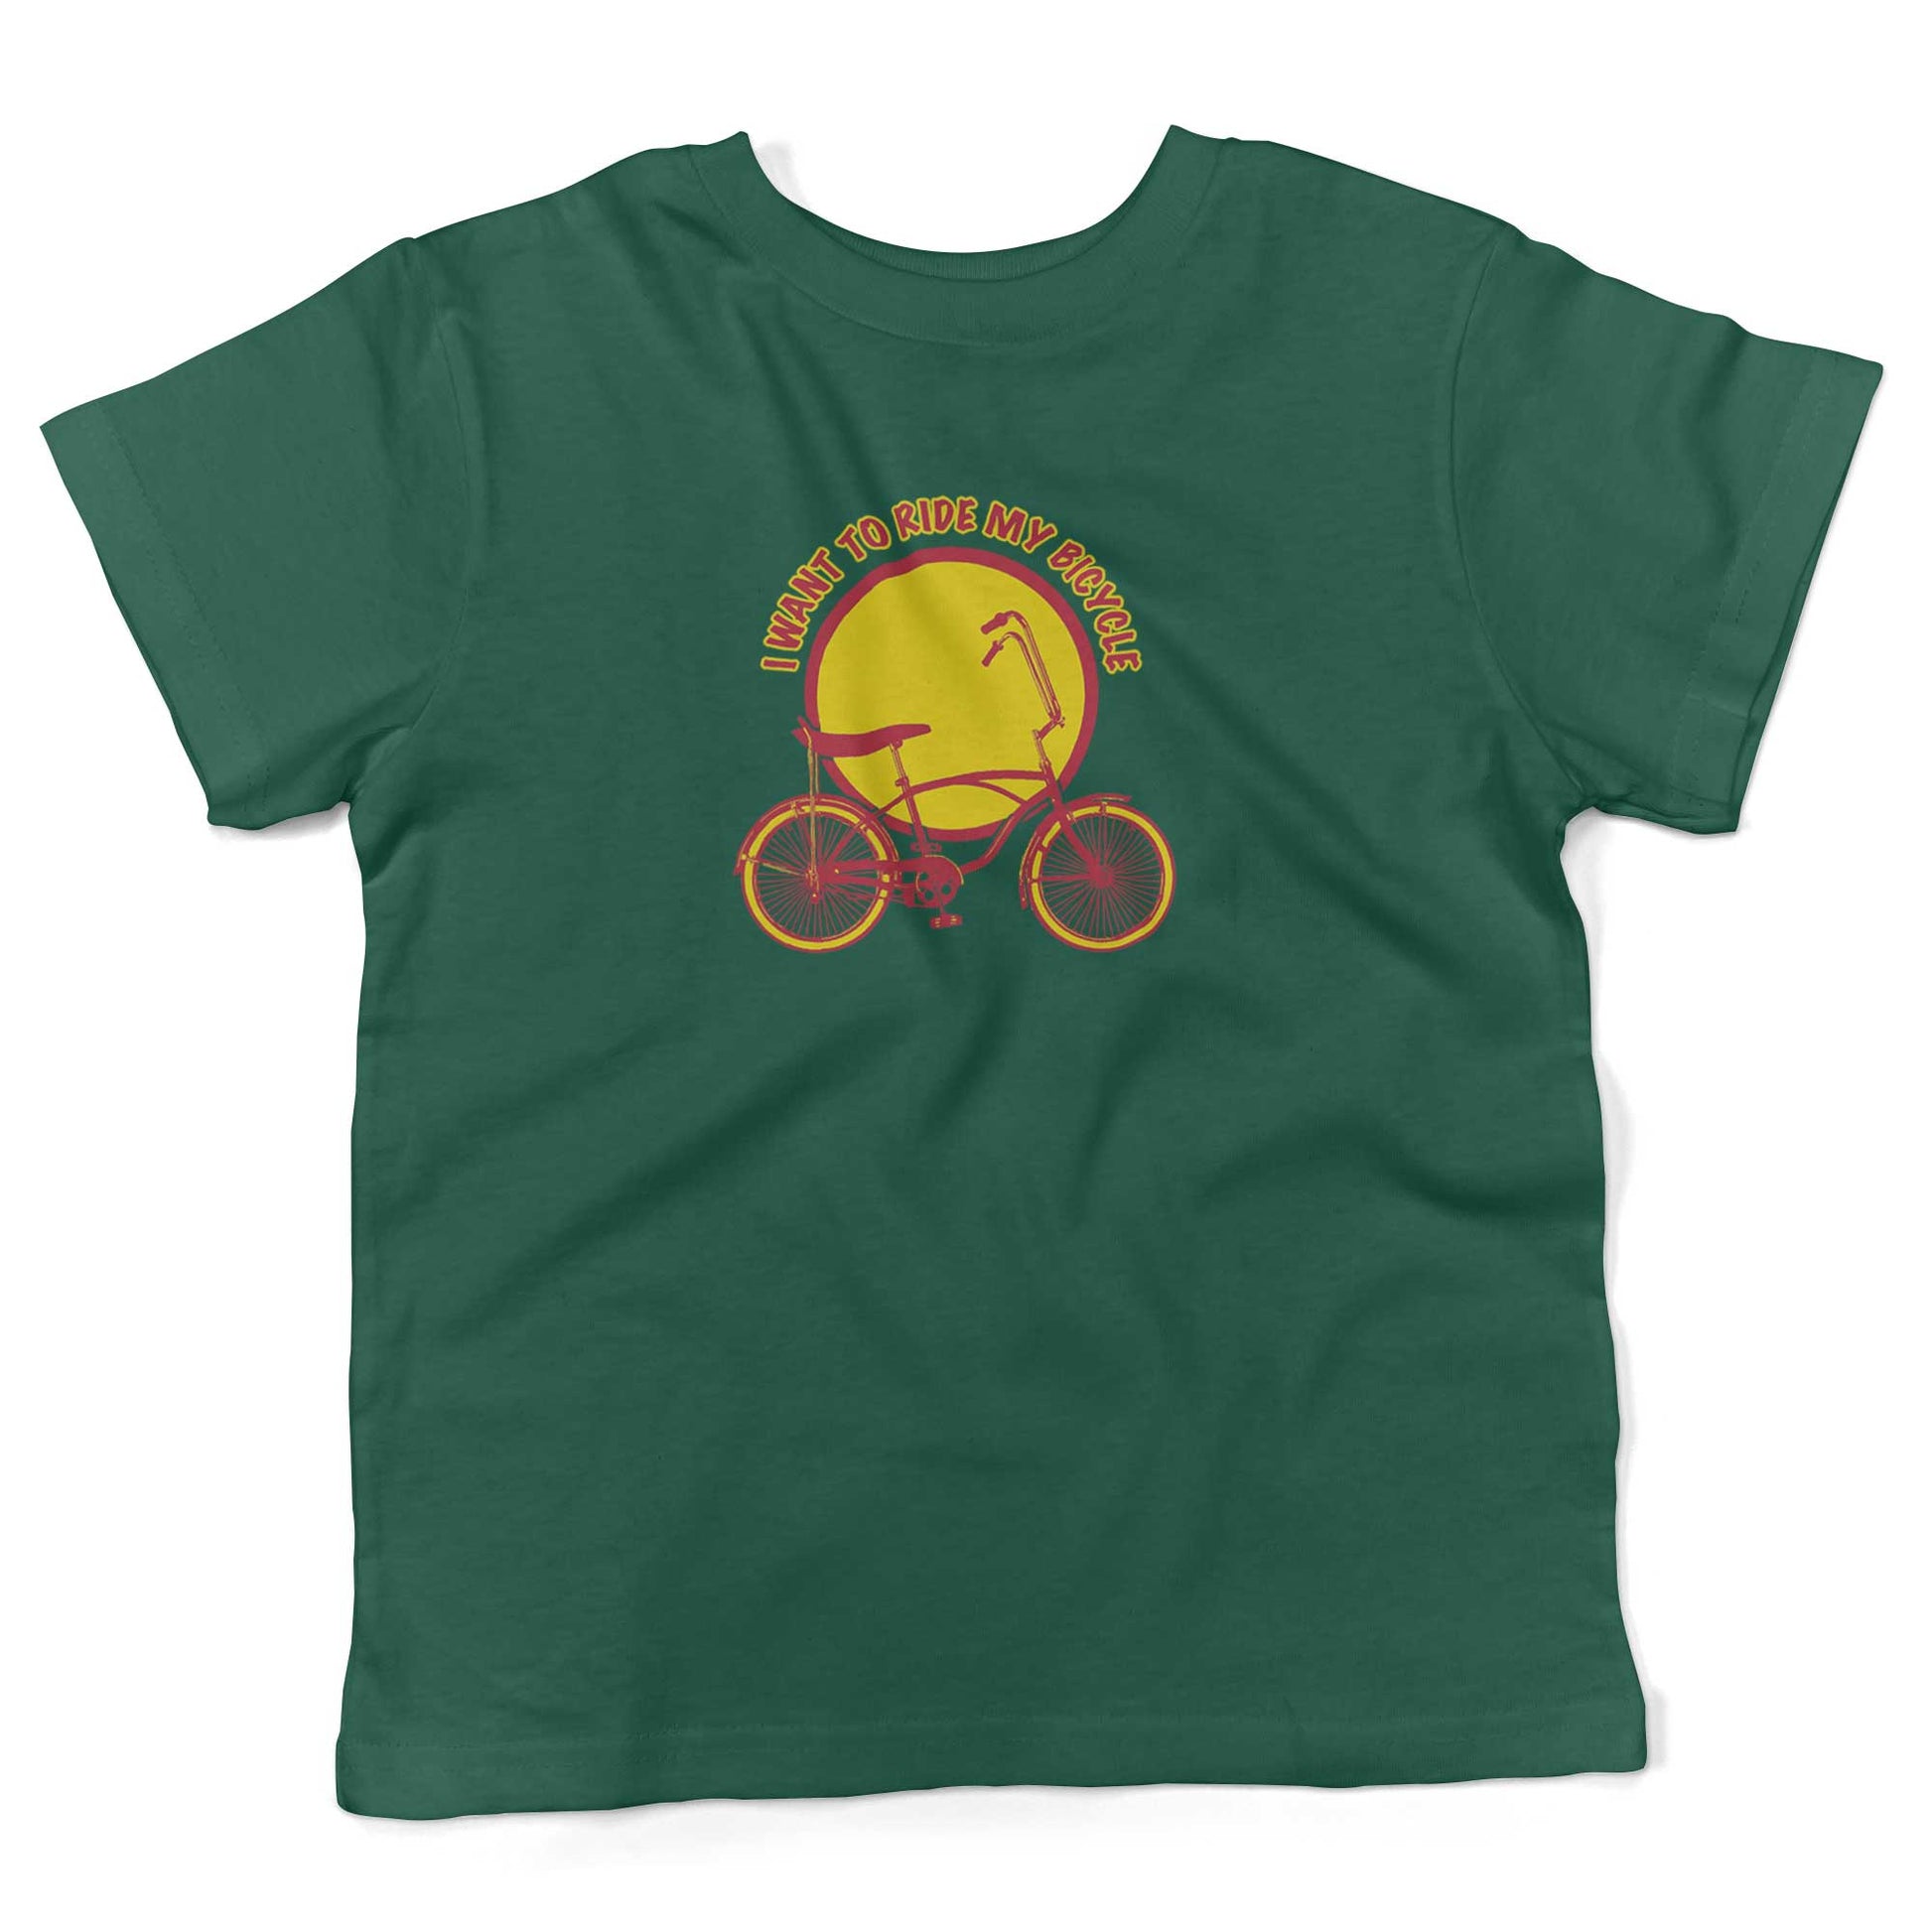 I Want To Ride My Bicycle Toddler Shirt-Kelly Green-2T